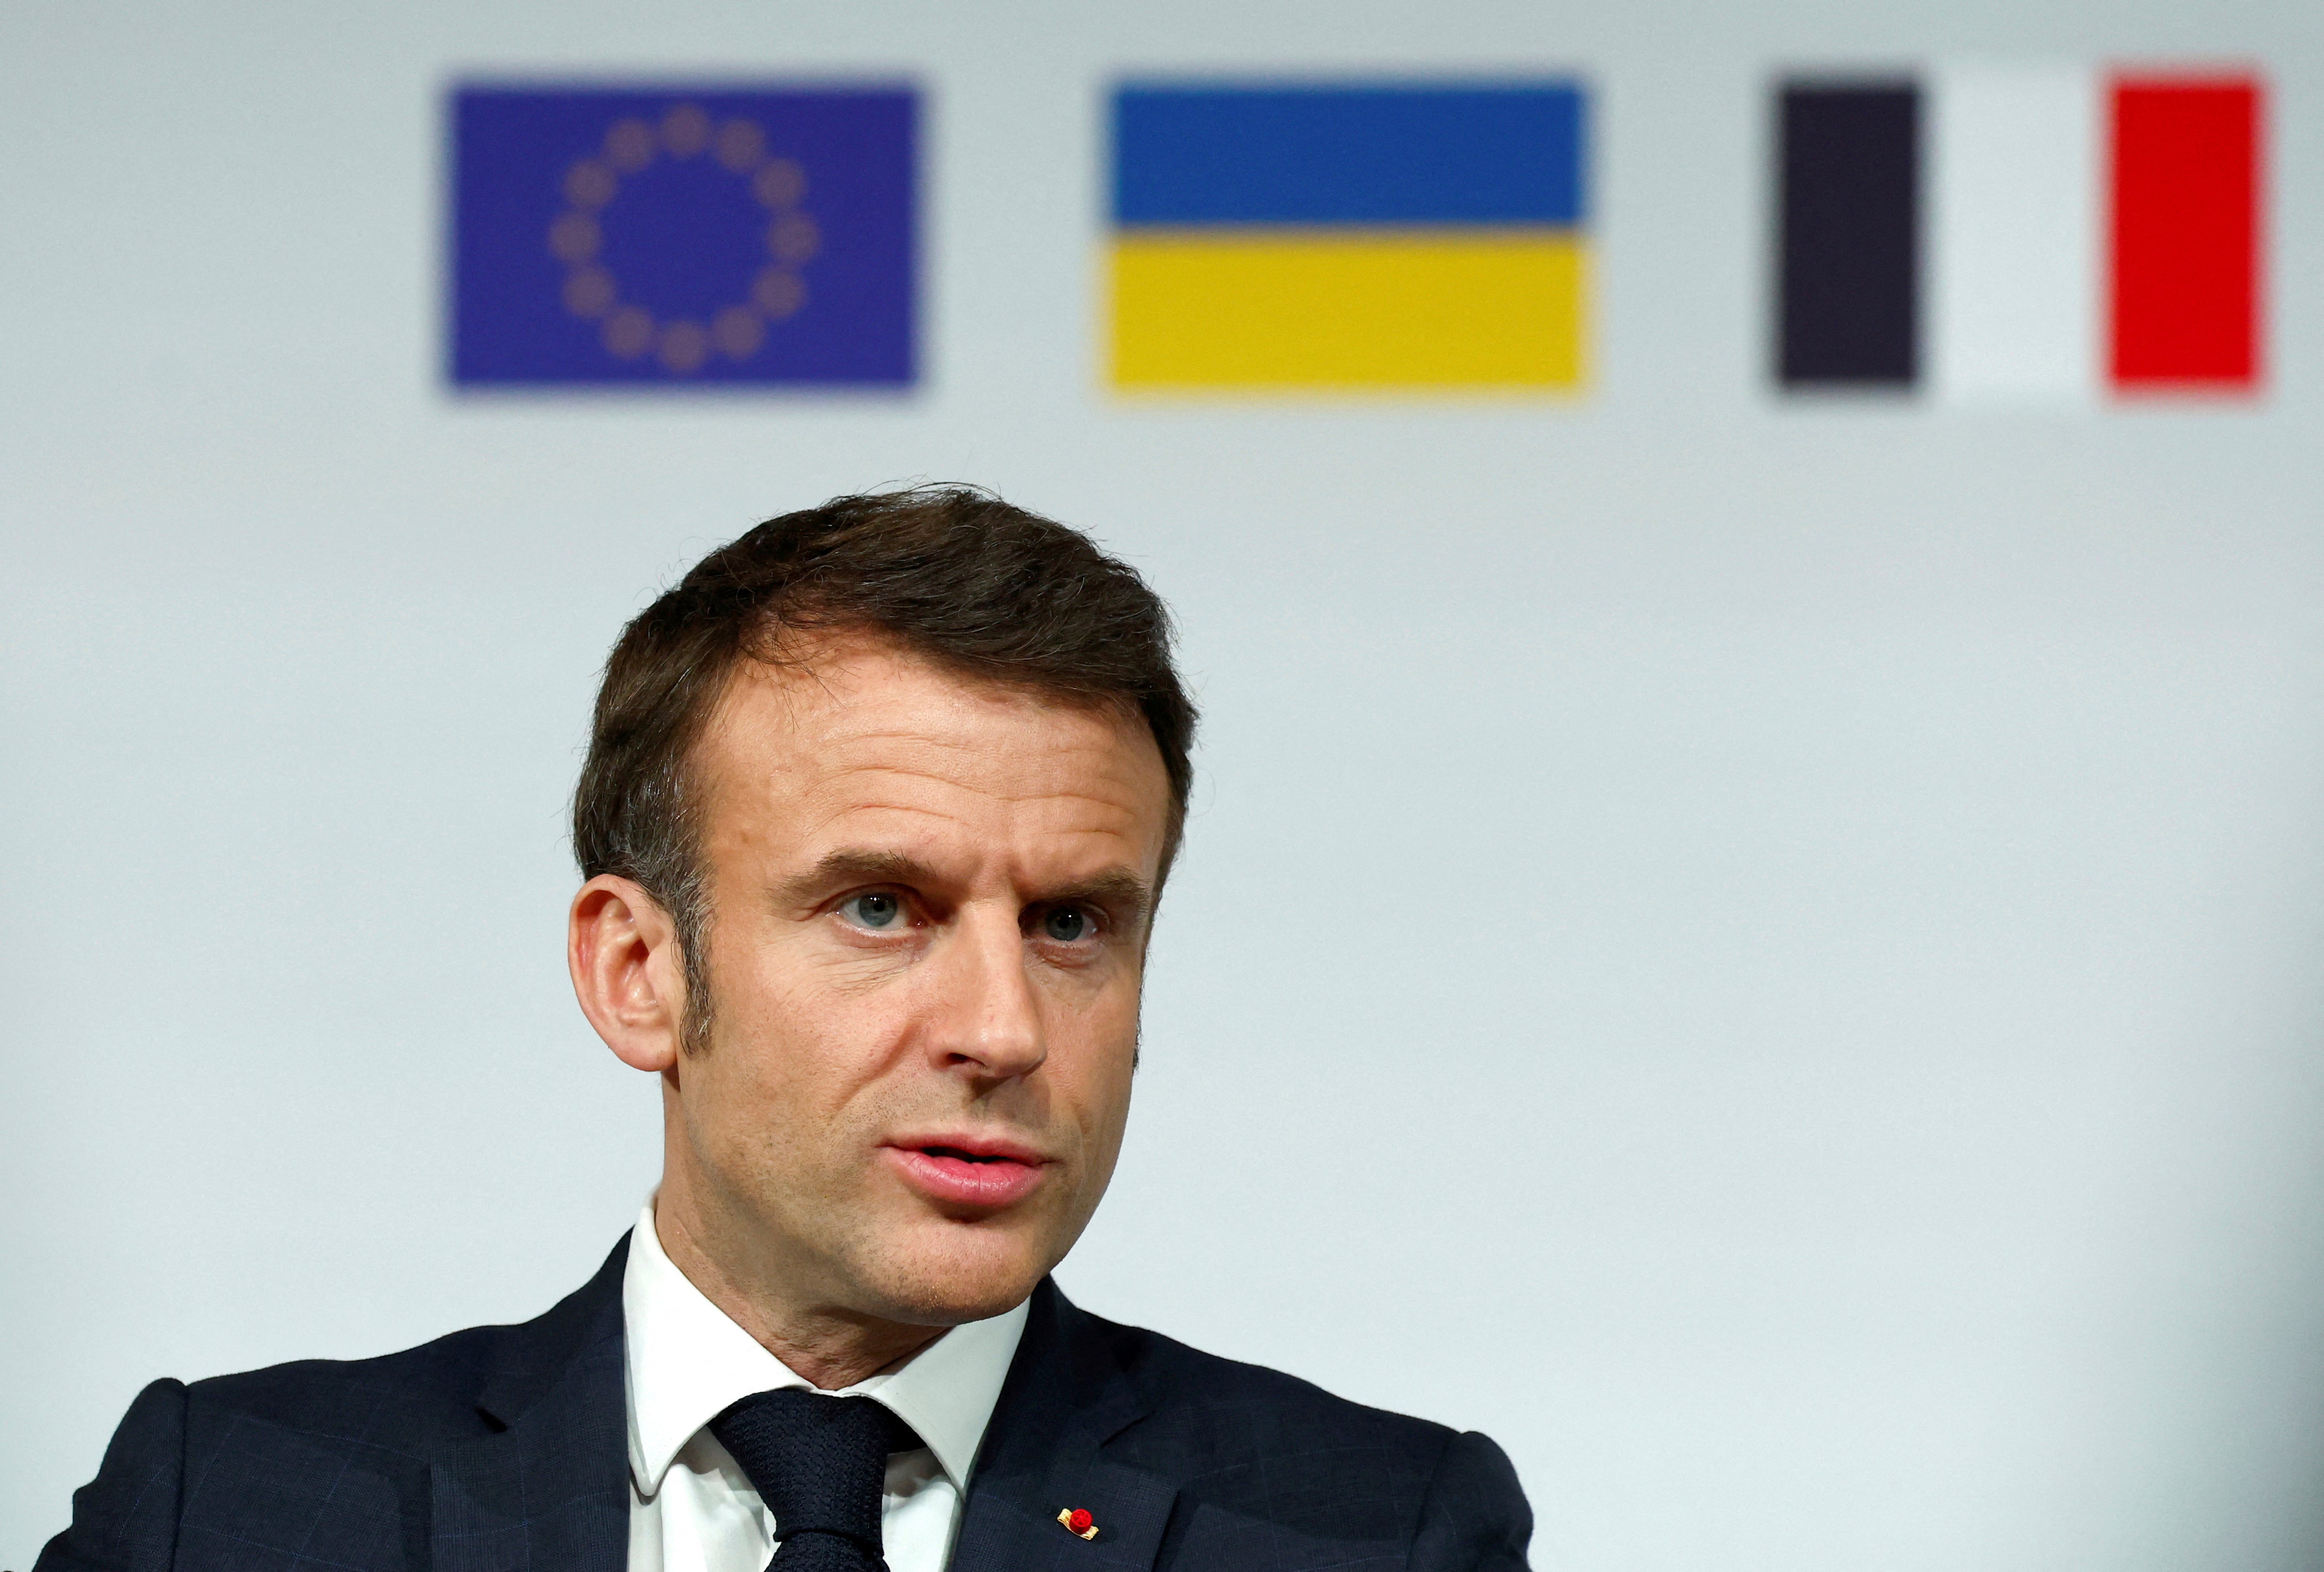 Macron floated the possibility of Western troops helping in Ukraine